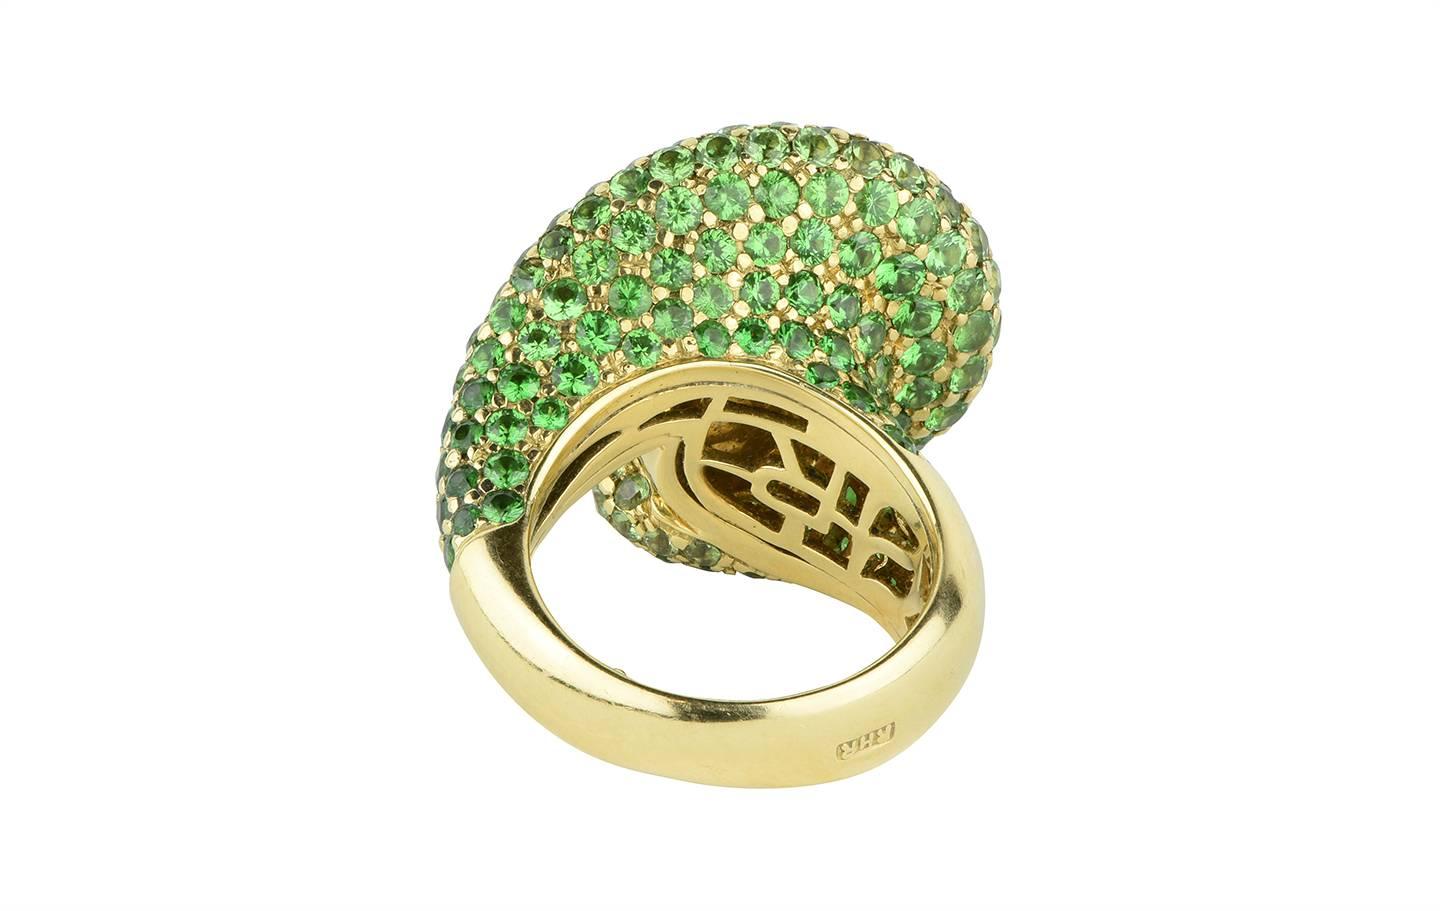 A stunning 12.20mm golden South Sea pearl and tsavorite garnet ring created by Rodney Rayner.  The ring is designed in the form of a curling wave containing an estimated 3.50cts in tsavorite garnets.

Signed:  Rayner
Hallmark:  750
*Currently a